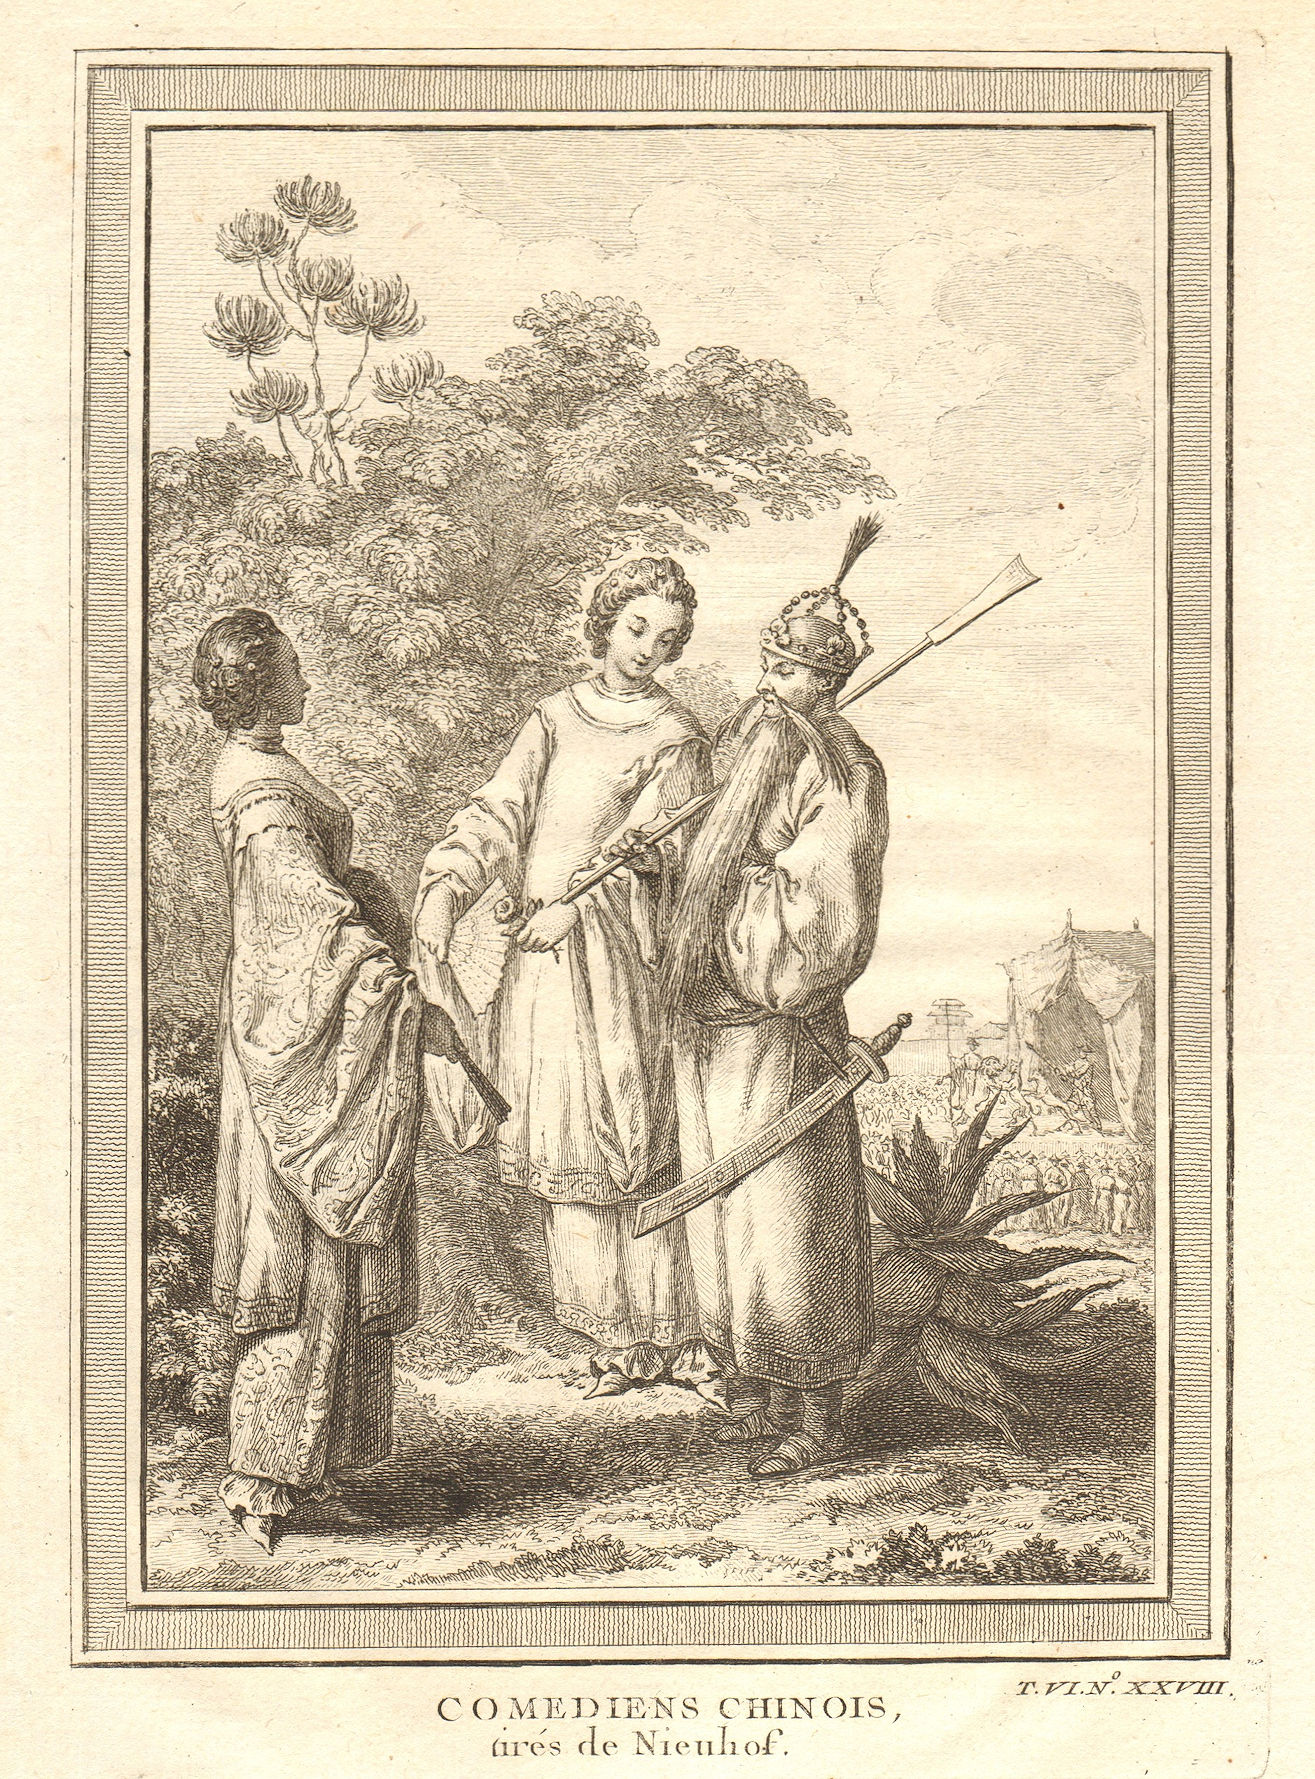 'Comediens Chinois'. China. Chinese comedians or actors. Nieuhof 1748 print